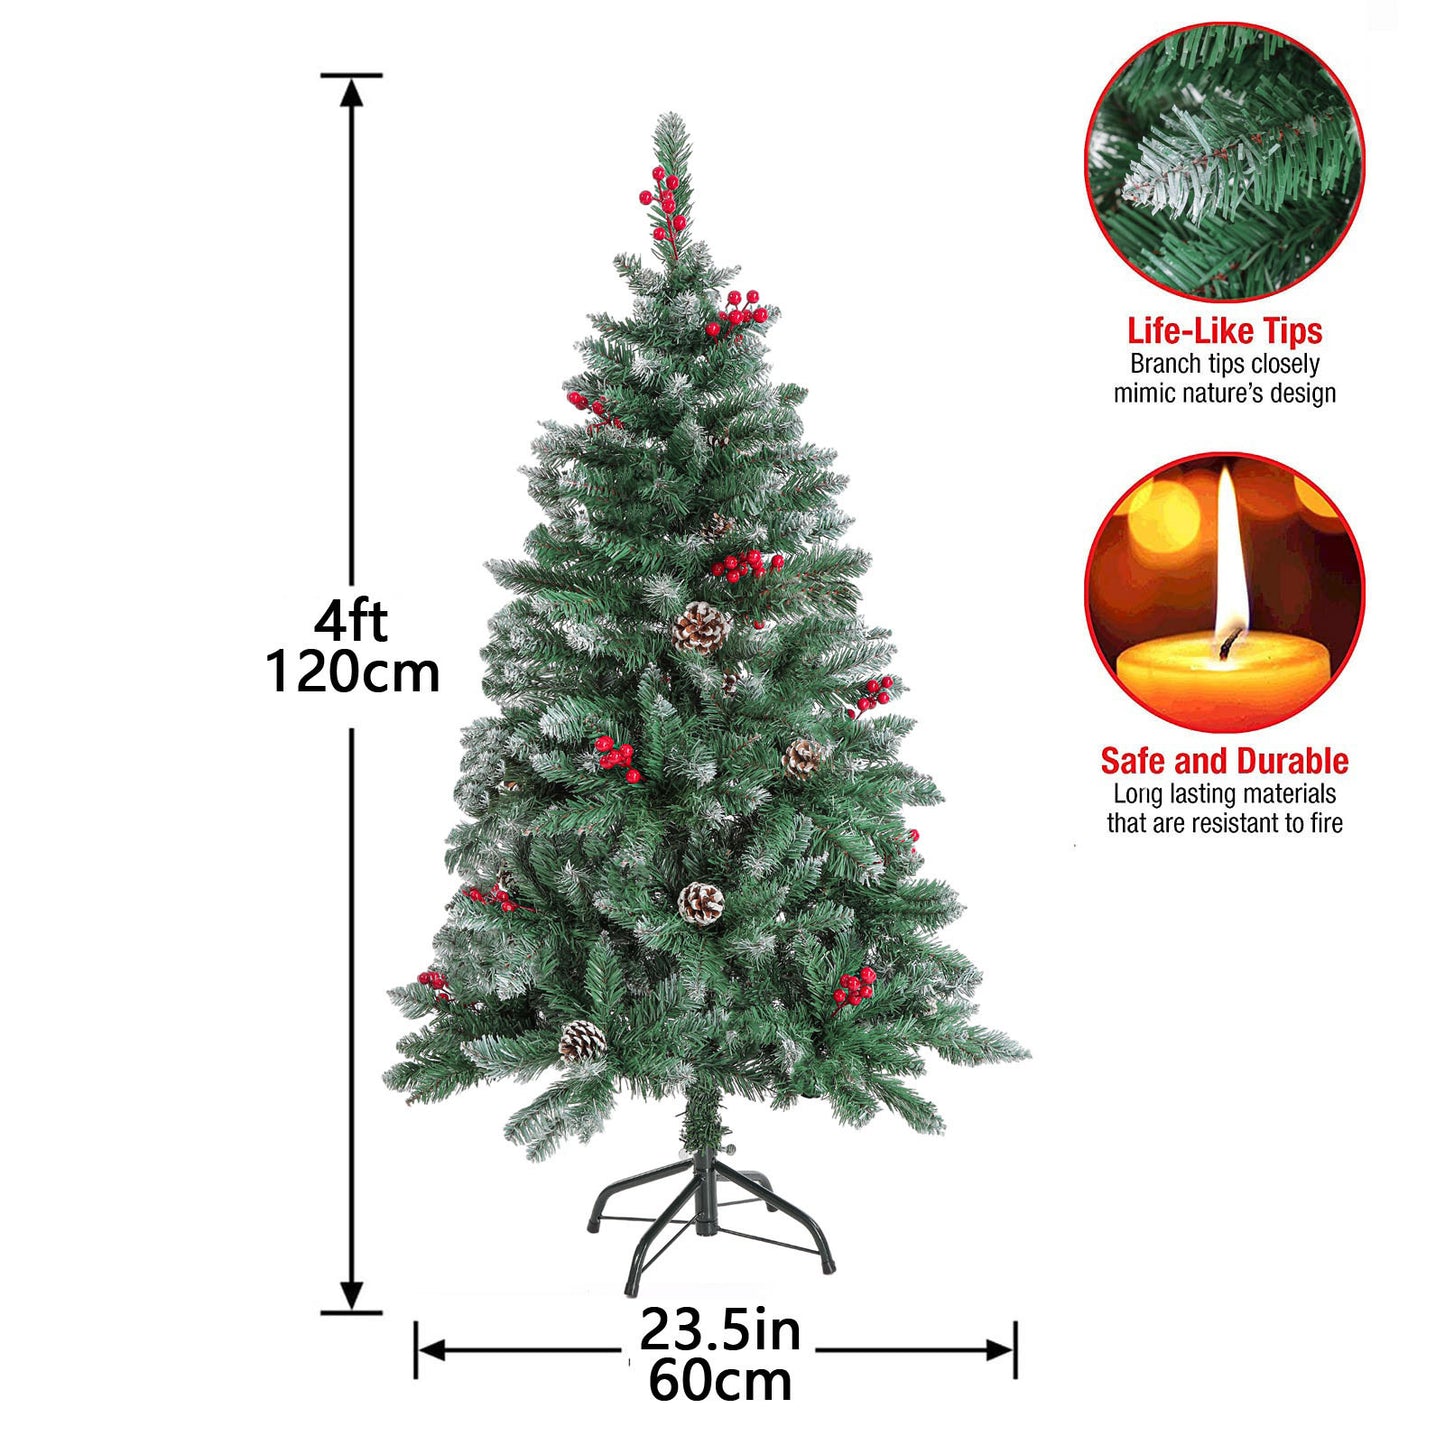 4ft Pre-Lit Green Artificial Christmas Tree with LED Lights, Pinecones, and Berries